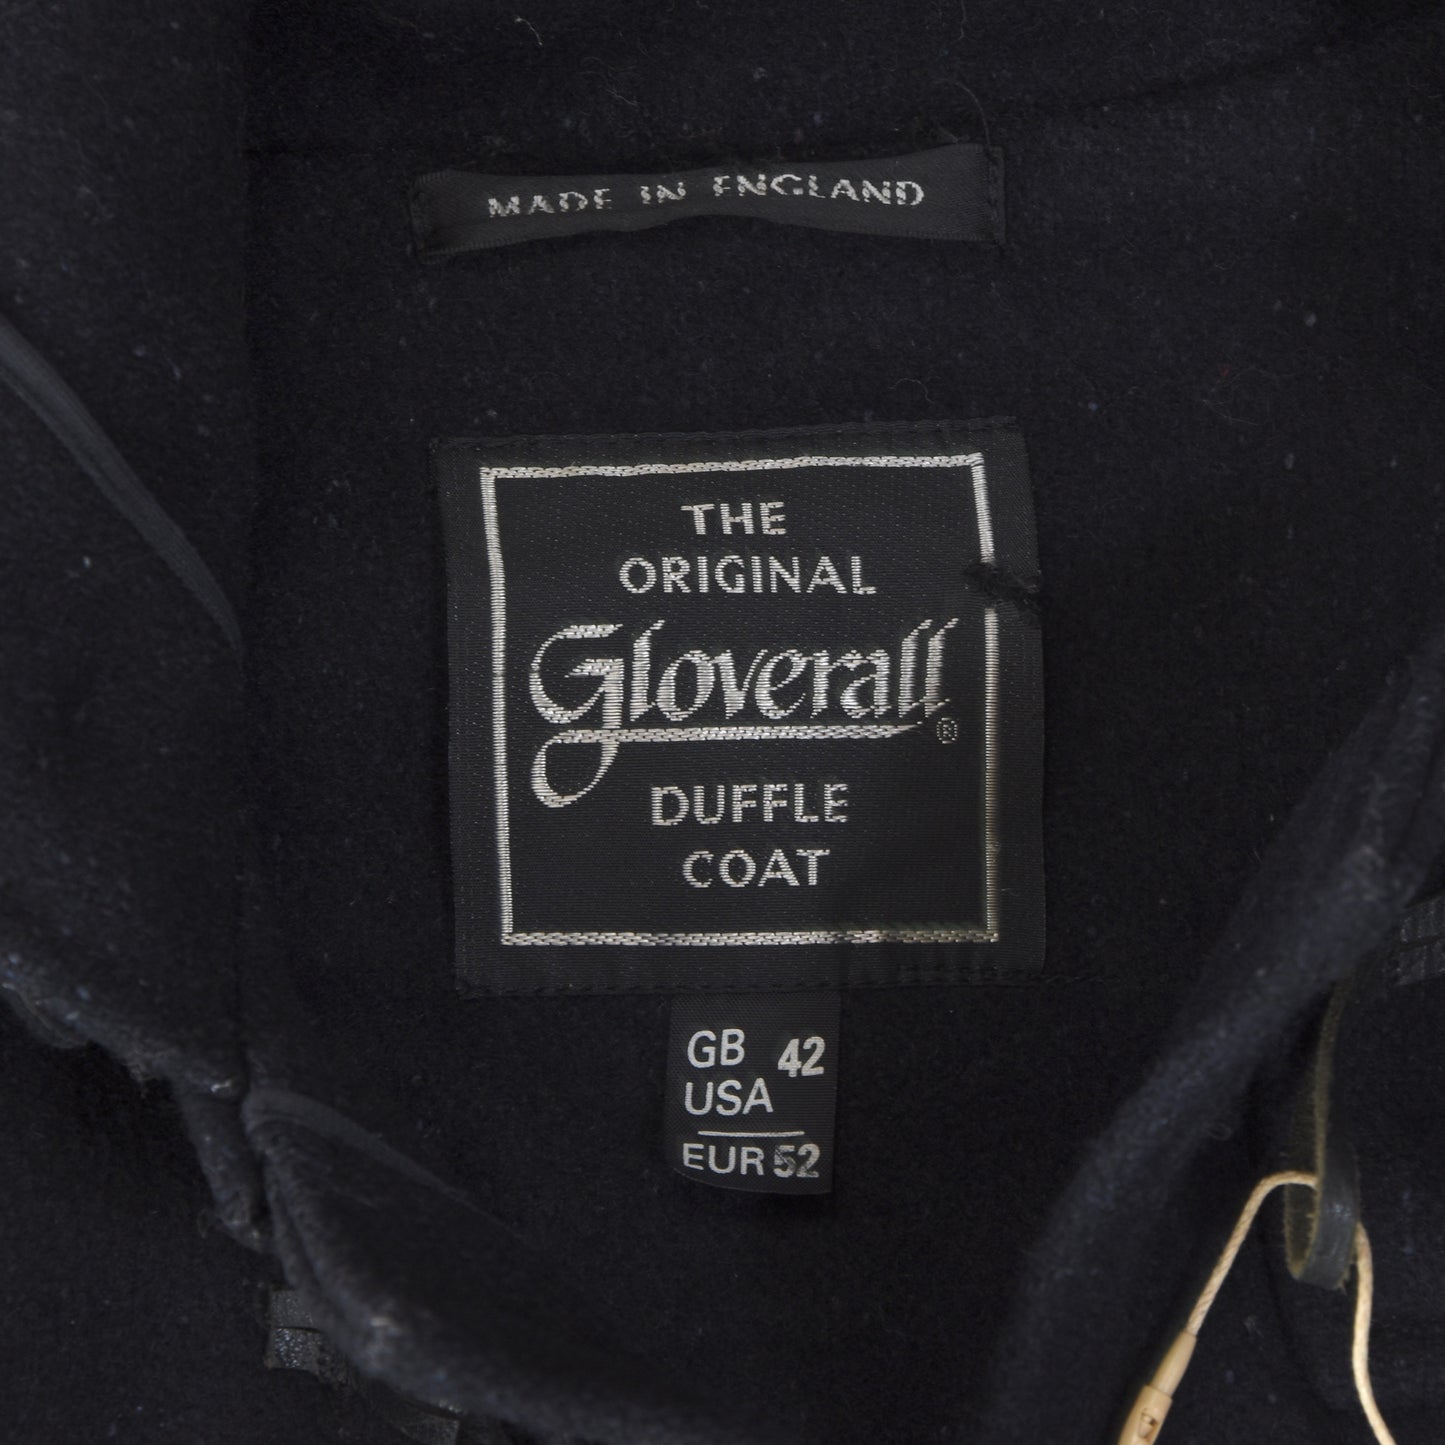 Vintage Gloverall Duffle Coat Size EUR 52 GB/USA 42 - Navy Blue